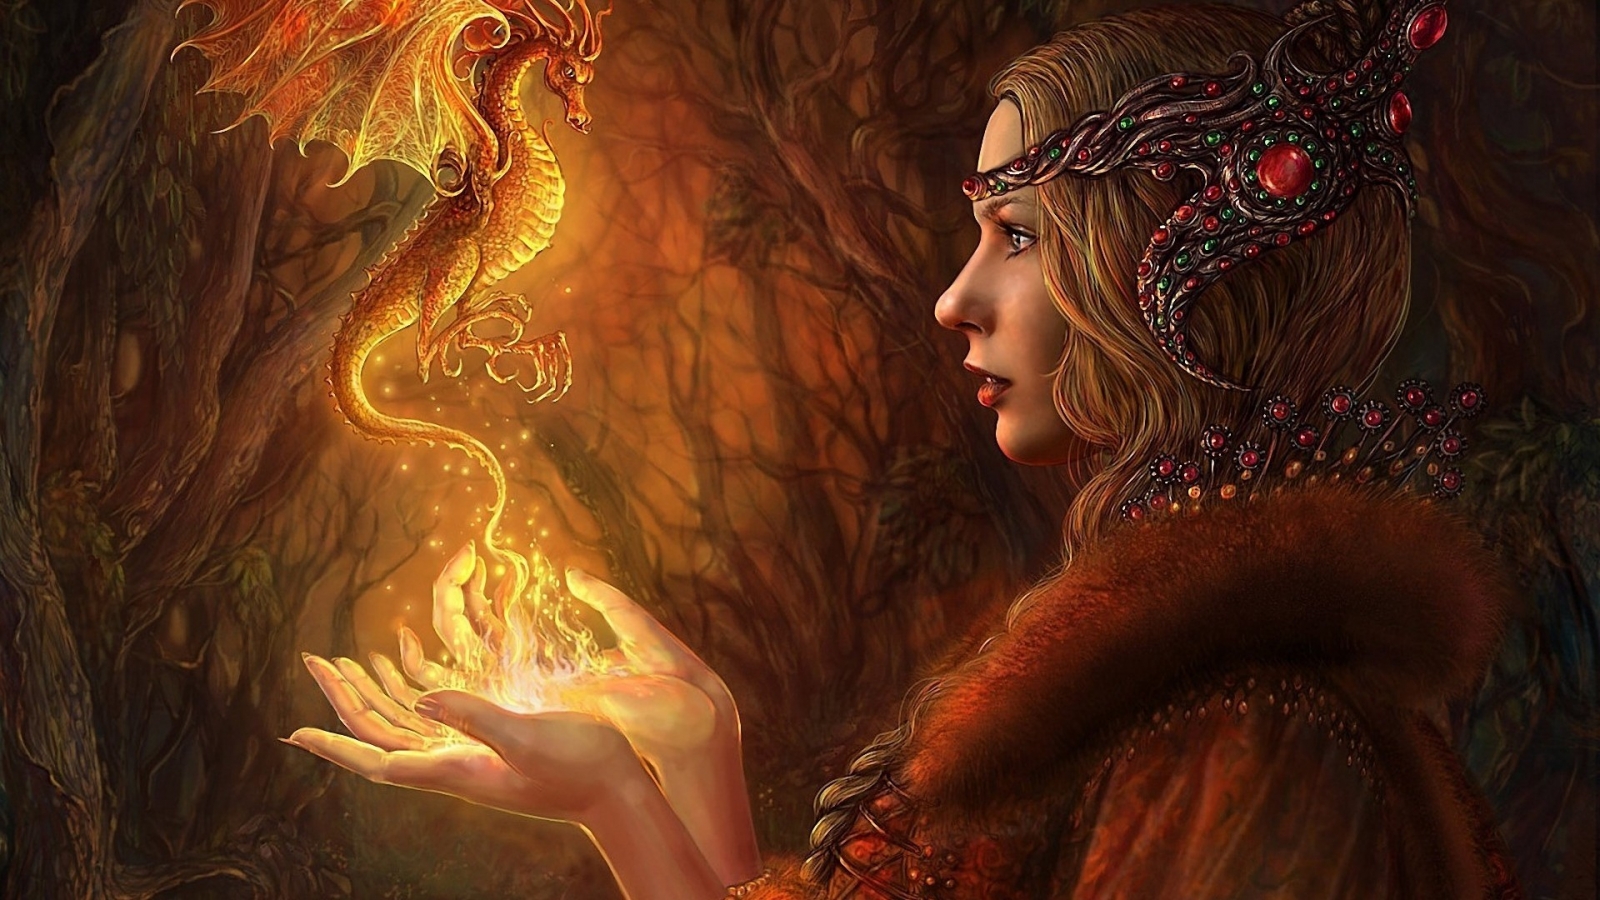 The Girl with Dragon for 1600 x 900 HDTV resolution